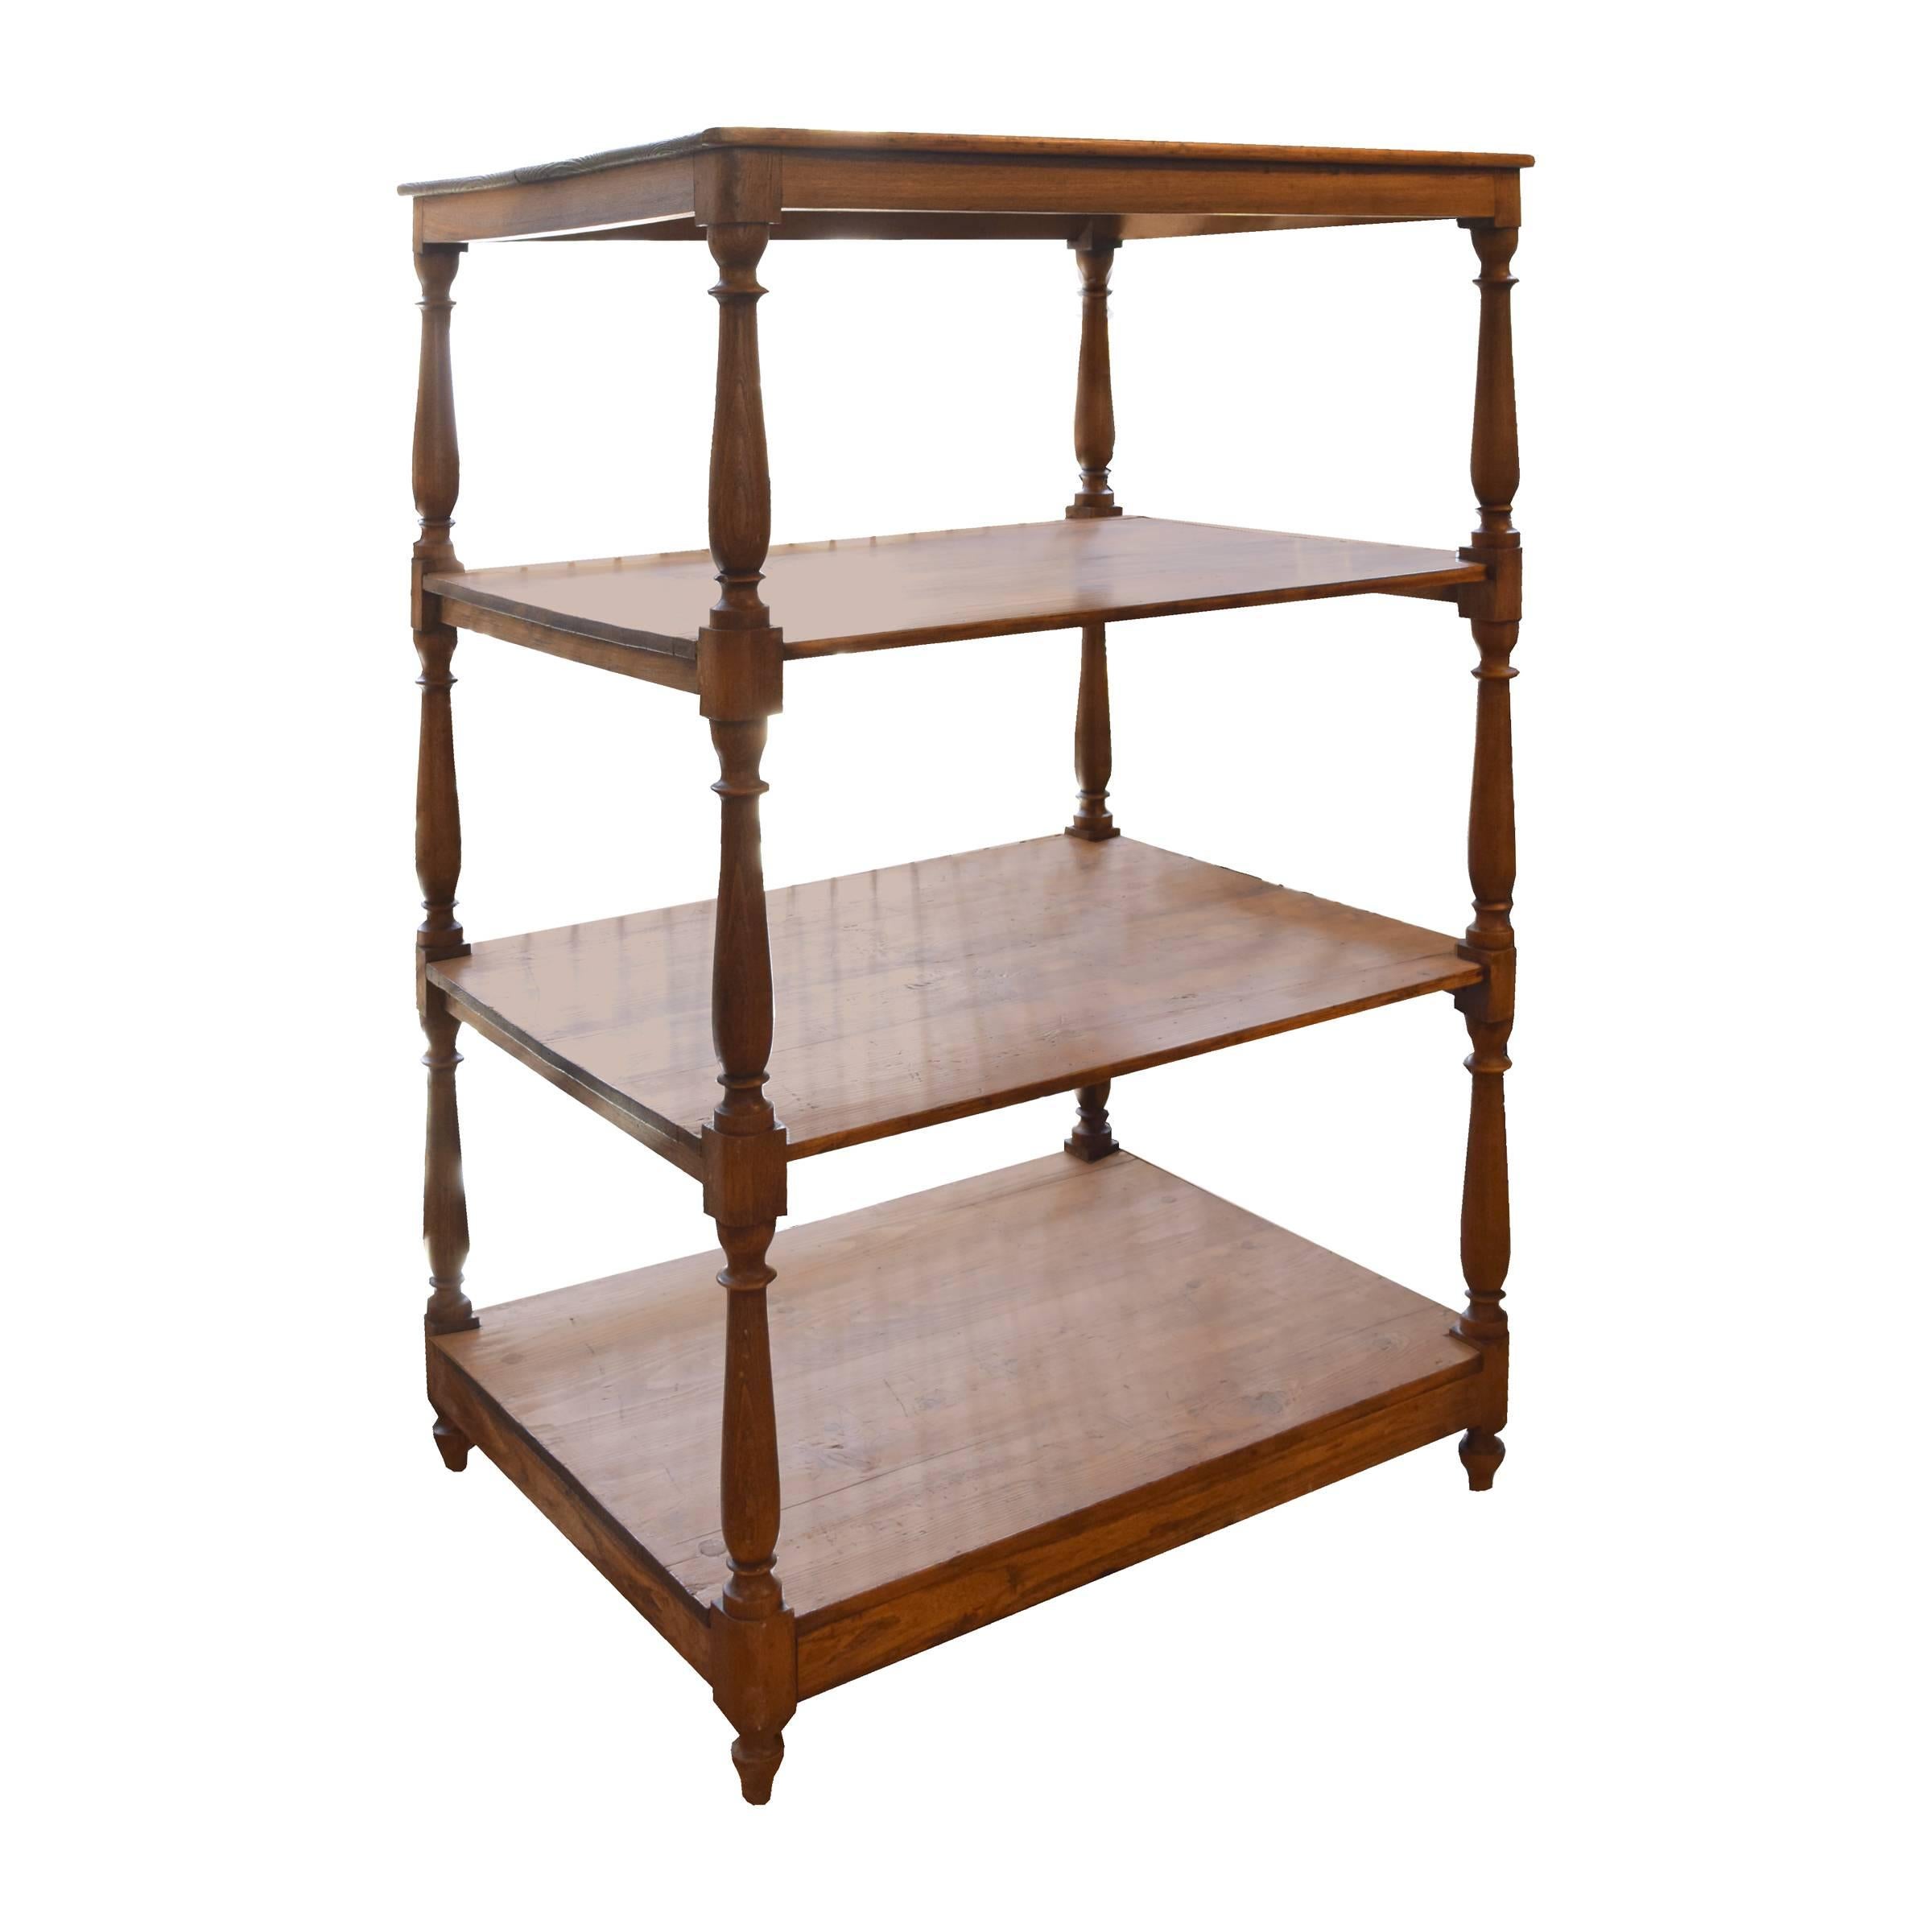 A Swiss four-tier pine display shelf with turned legs, from a Swiss chocolate shop.